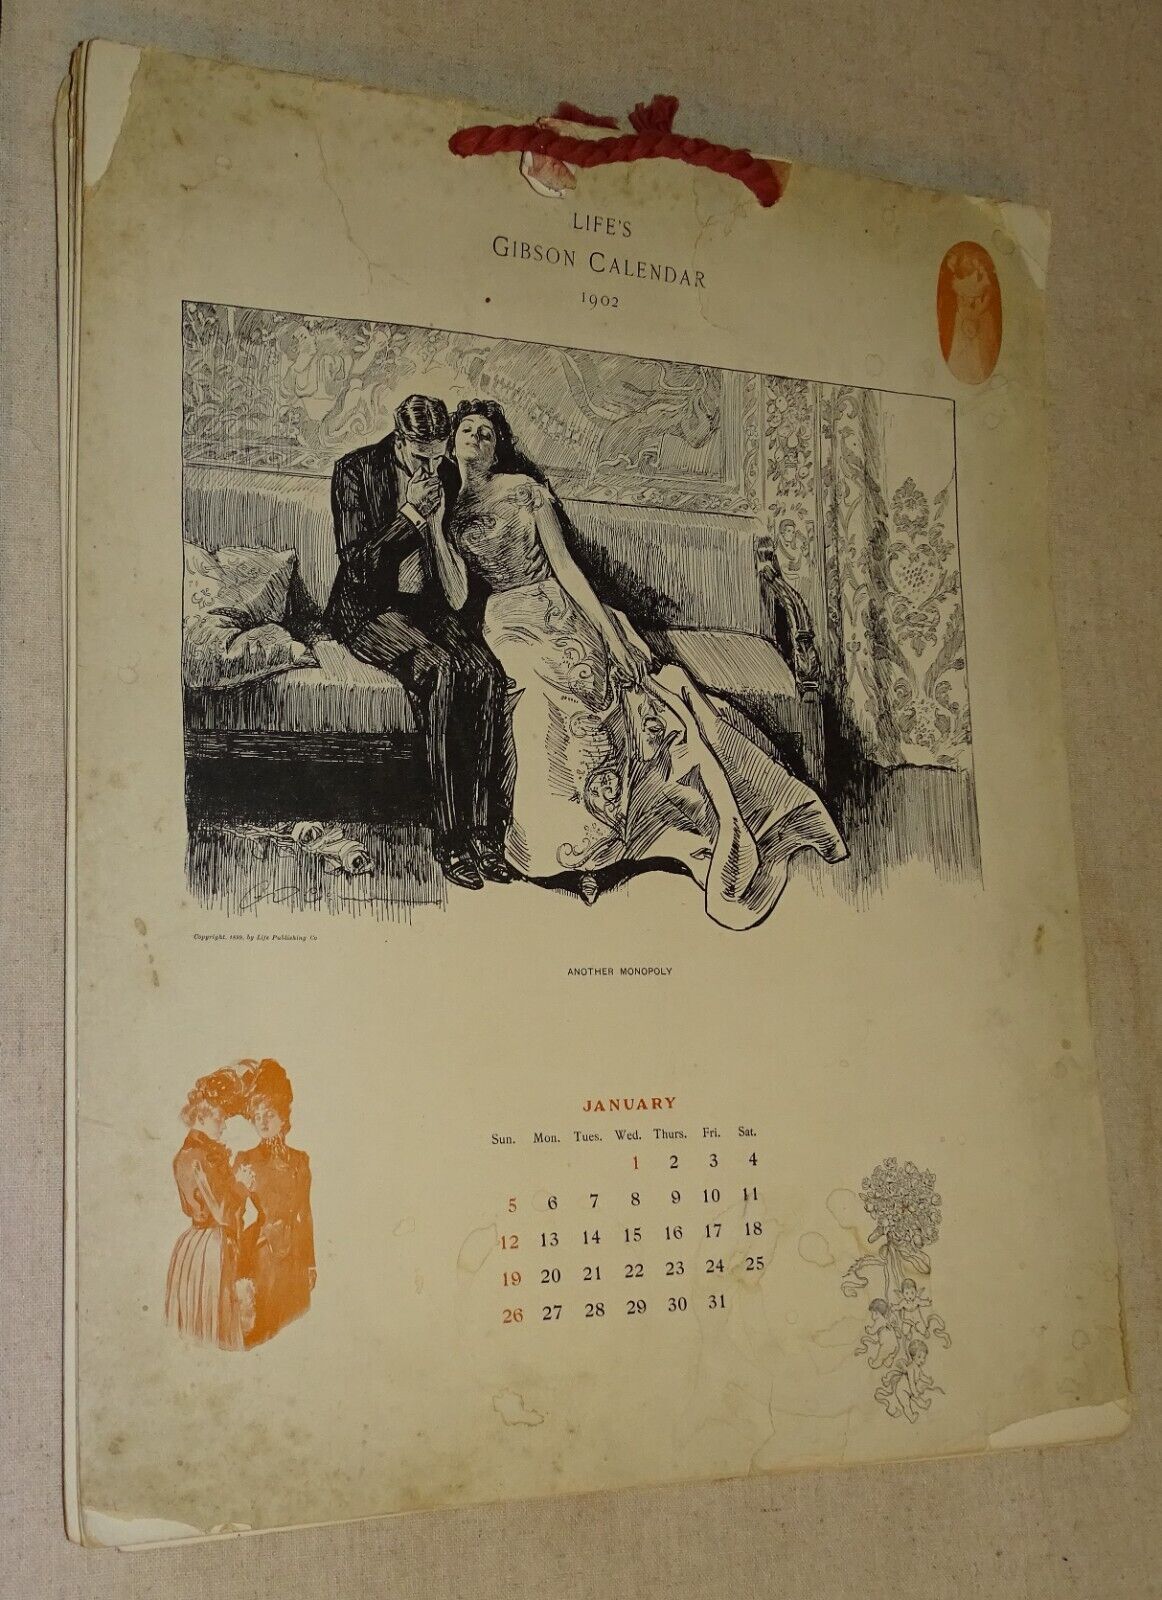 Life's Gibson Calendar 1902 (illustrations by Charles Dana Gibson) NOT COMPLETE